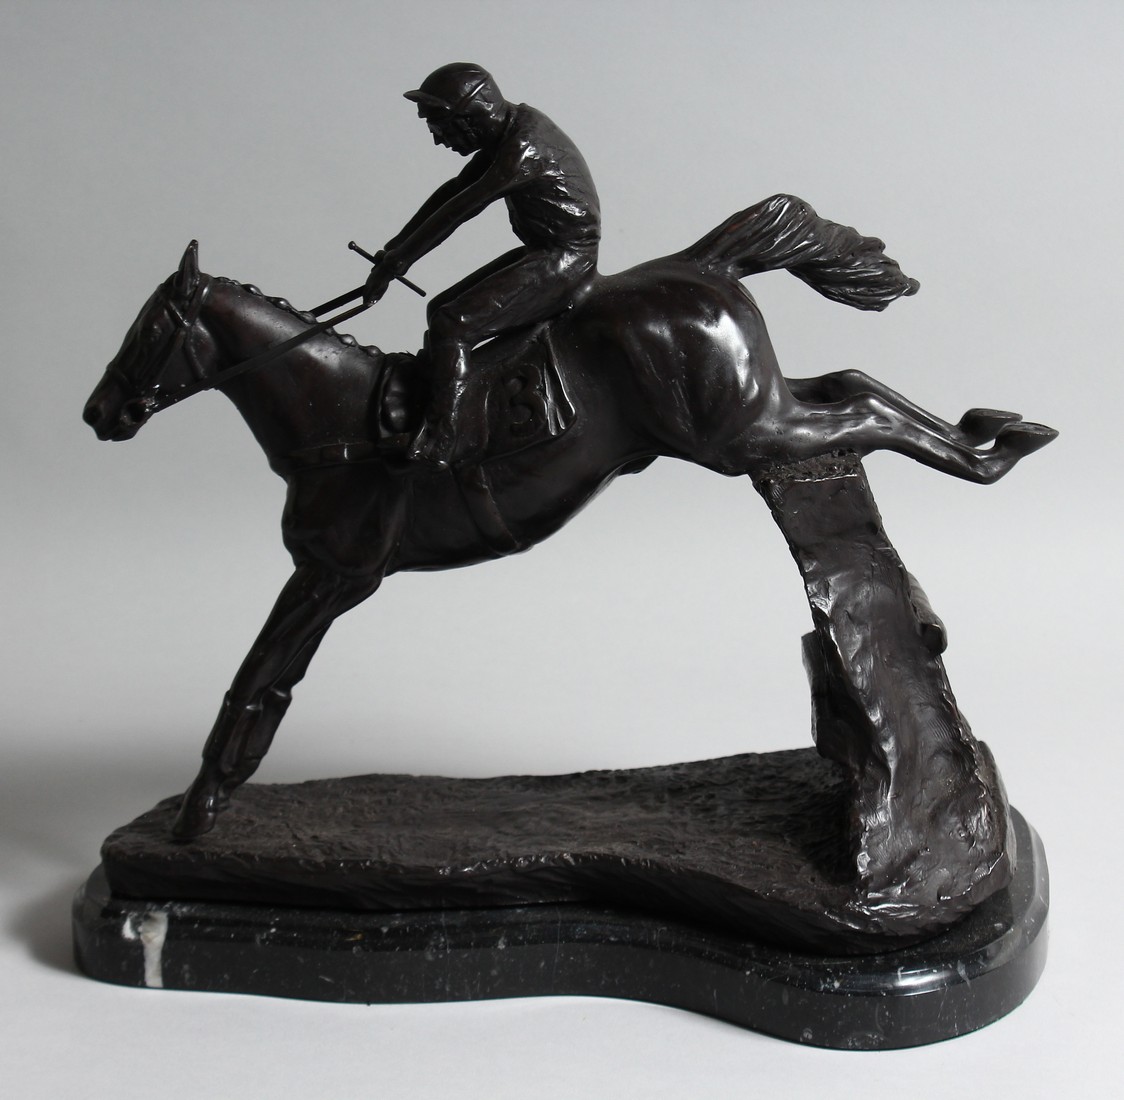 A BRONZE HORSE AND JOCKEY over the sticks, on a marble base. - Image 2 of 2